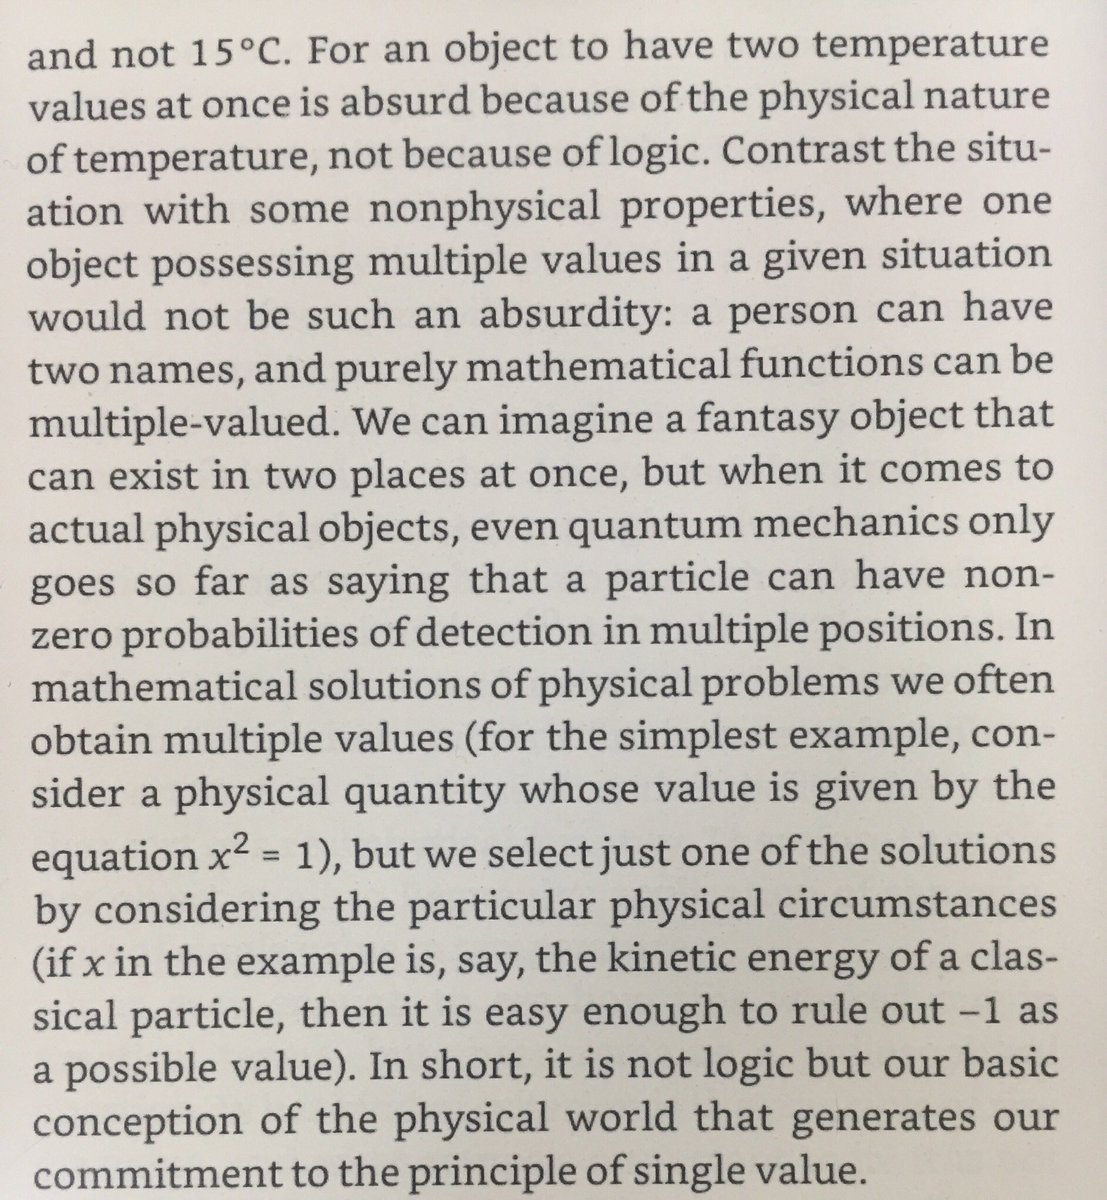 I really love this short section about the difference between what’s a “logical” versus “physical” principle. Read it three times. Will be thinking about it some more. There’s an insight there that’s escaping me but hope it’ll click eventually.